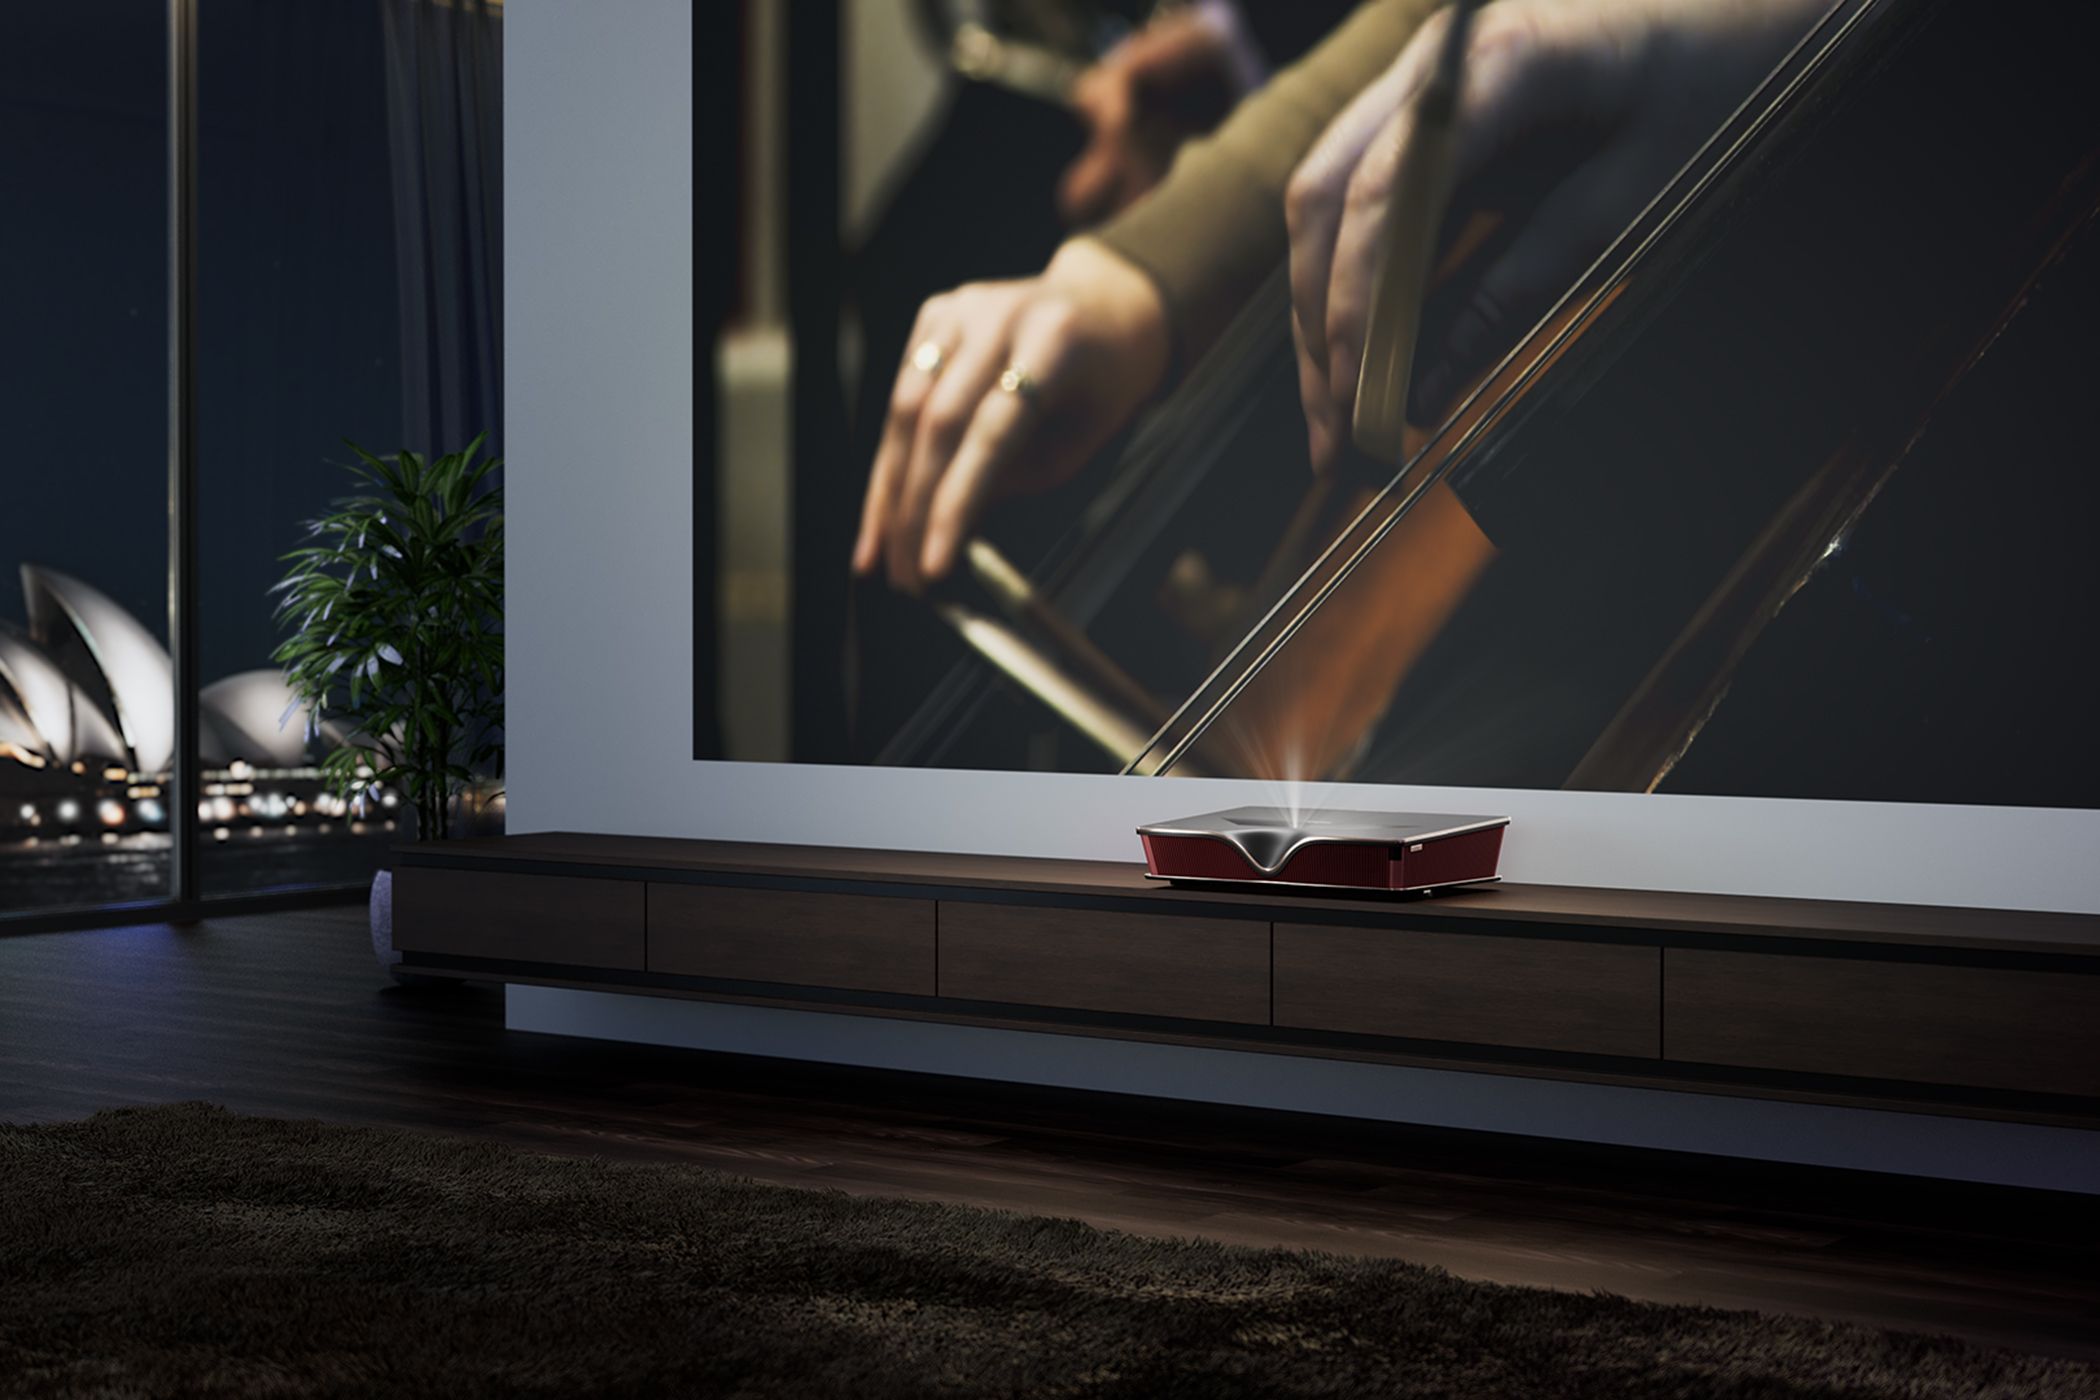 A projector TV screen shows a person playing an instrument